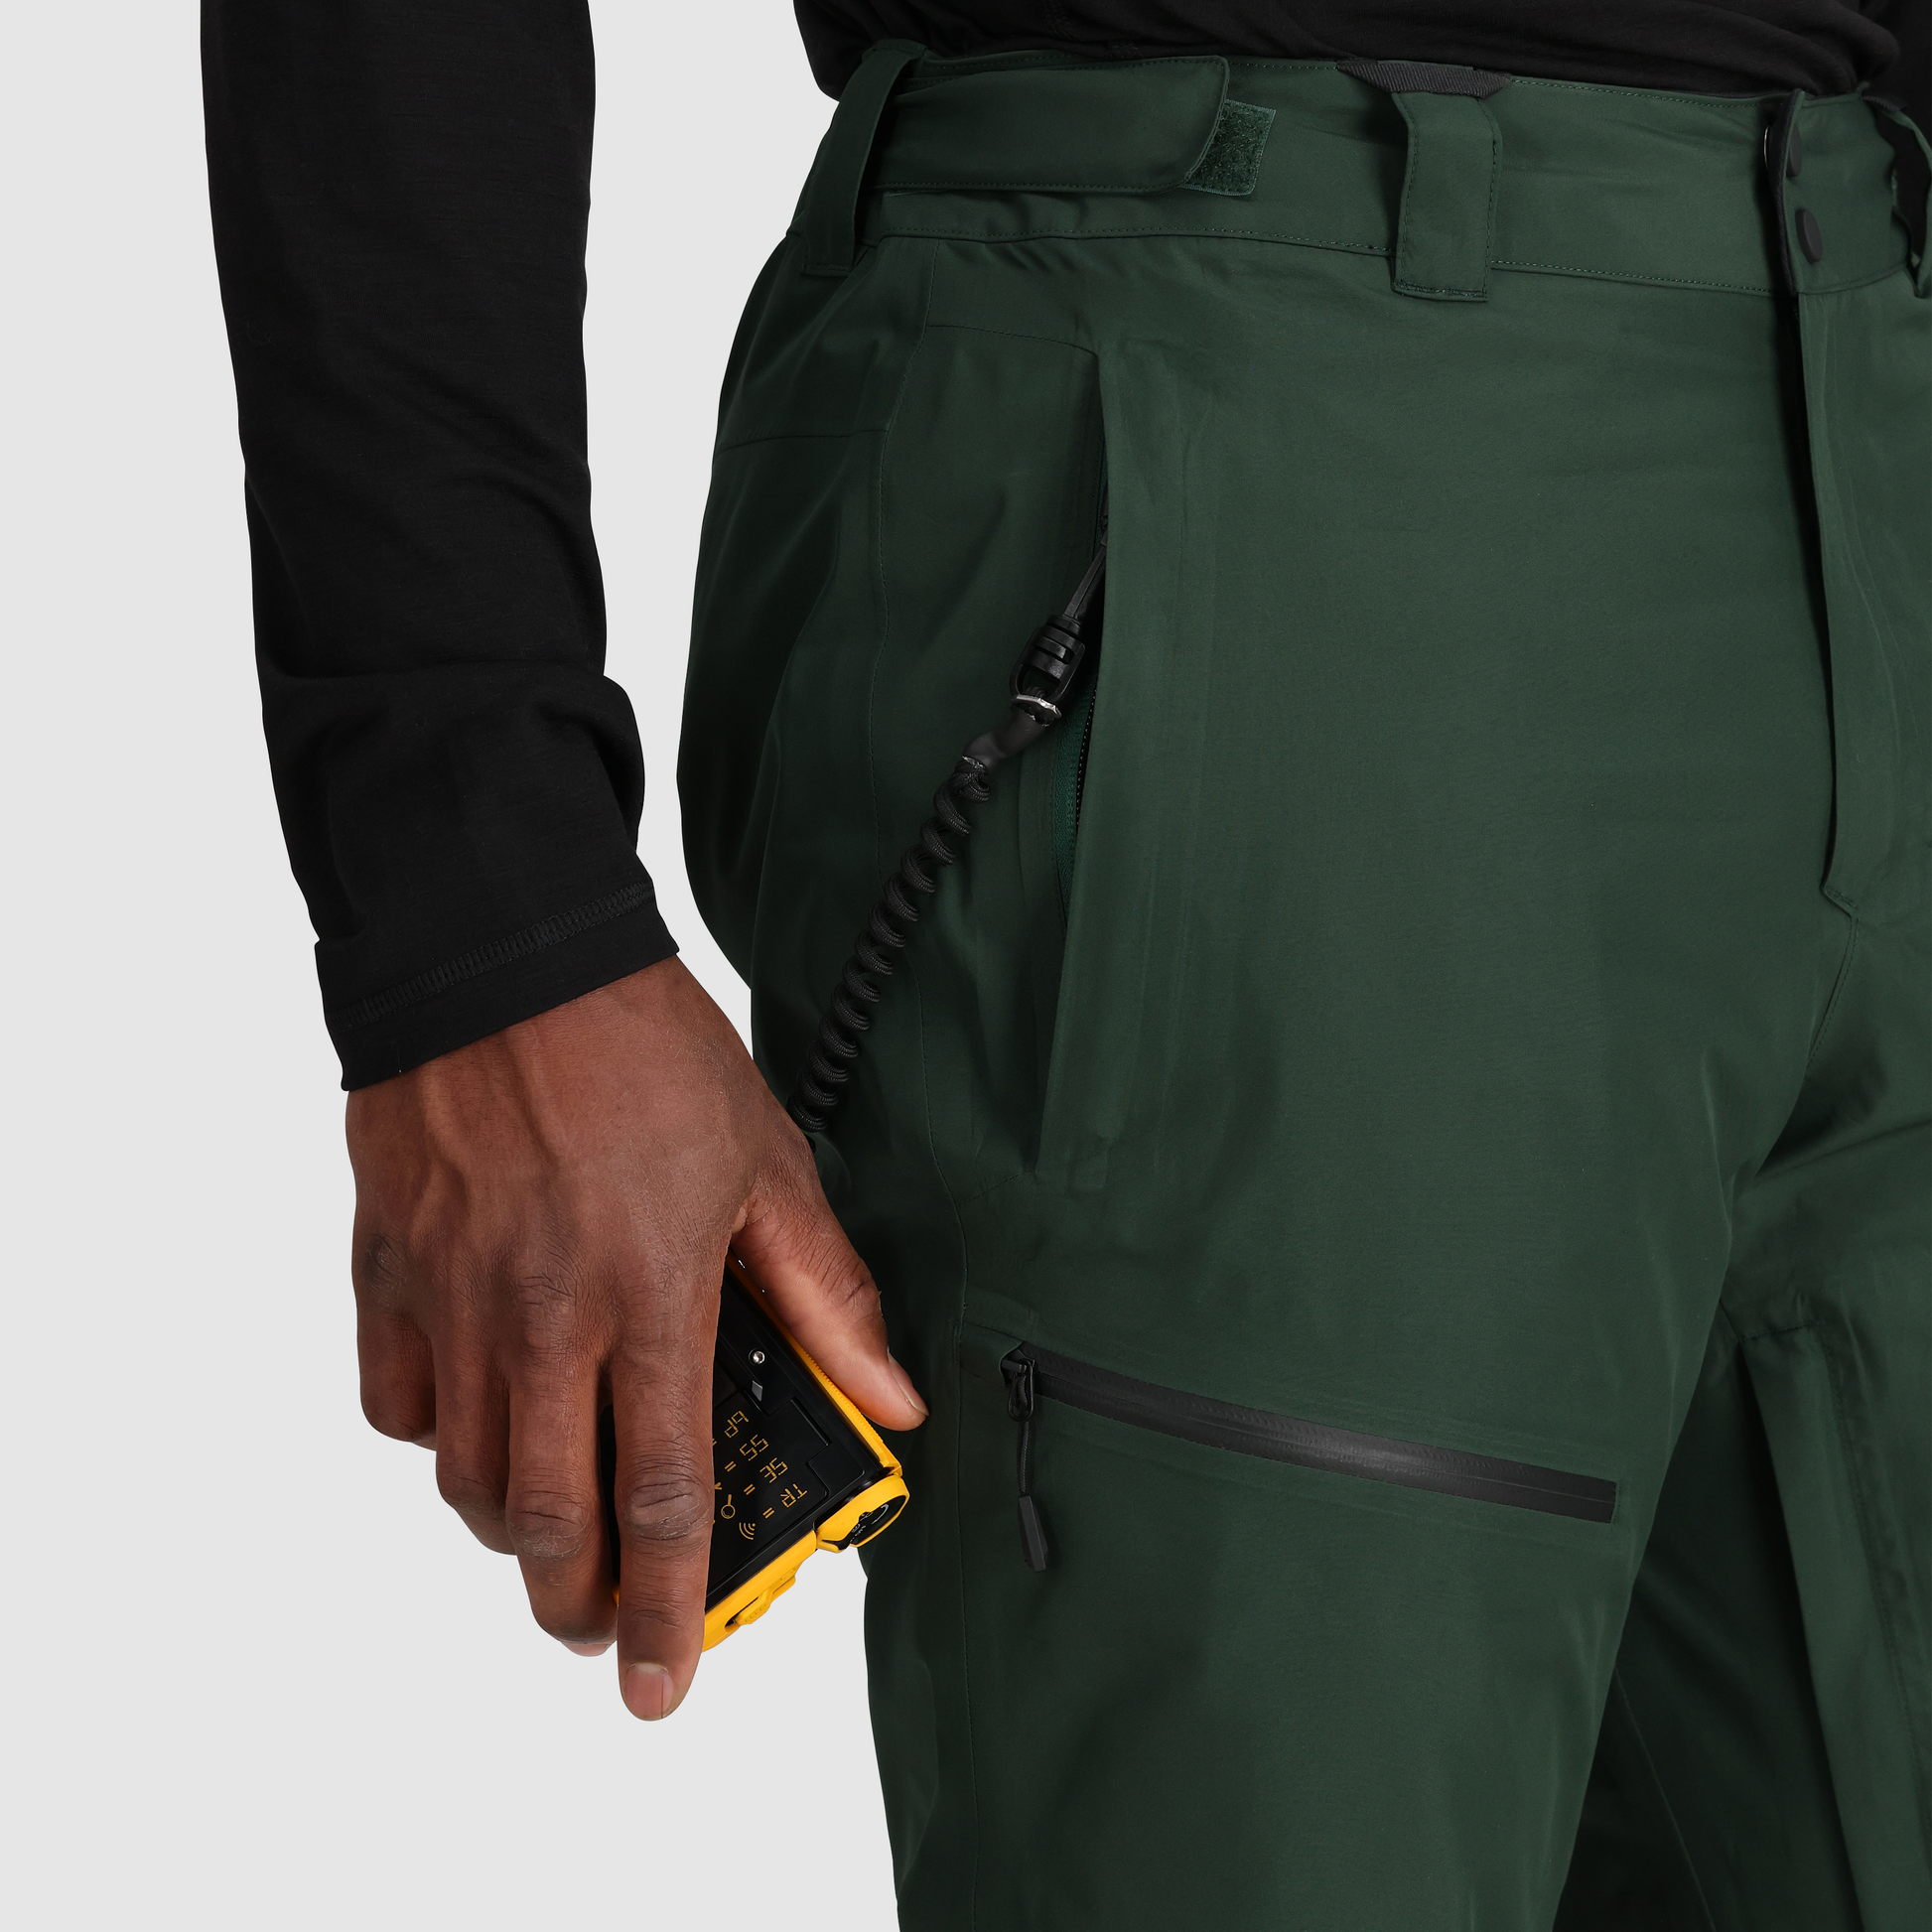 B5 :: Beacon Pocket / Keep your avalanche beacon secure with this specially-designed pocket for comfort, closeness, and safety.